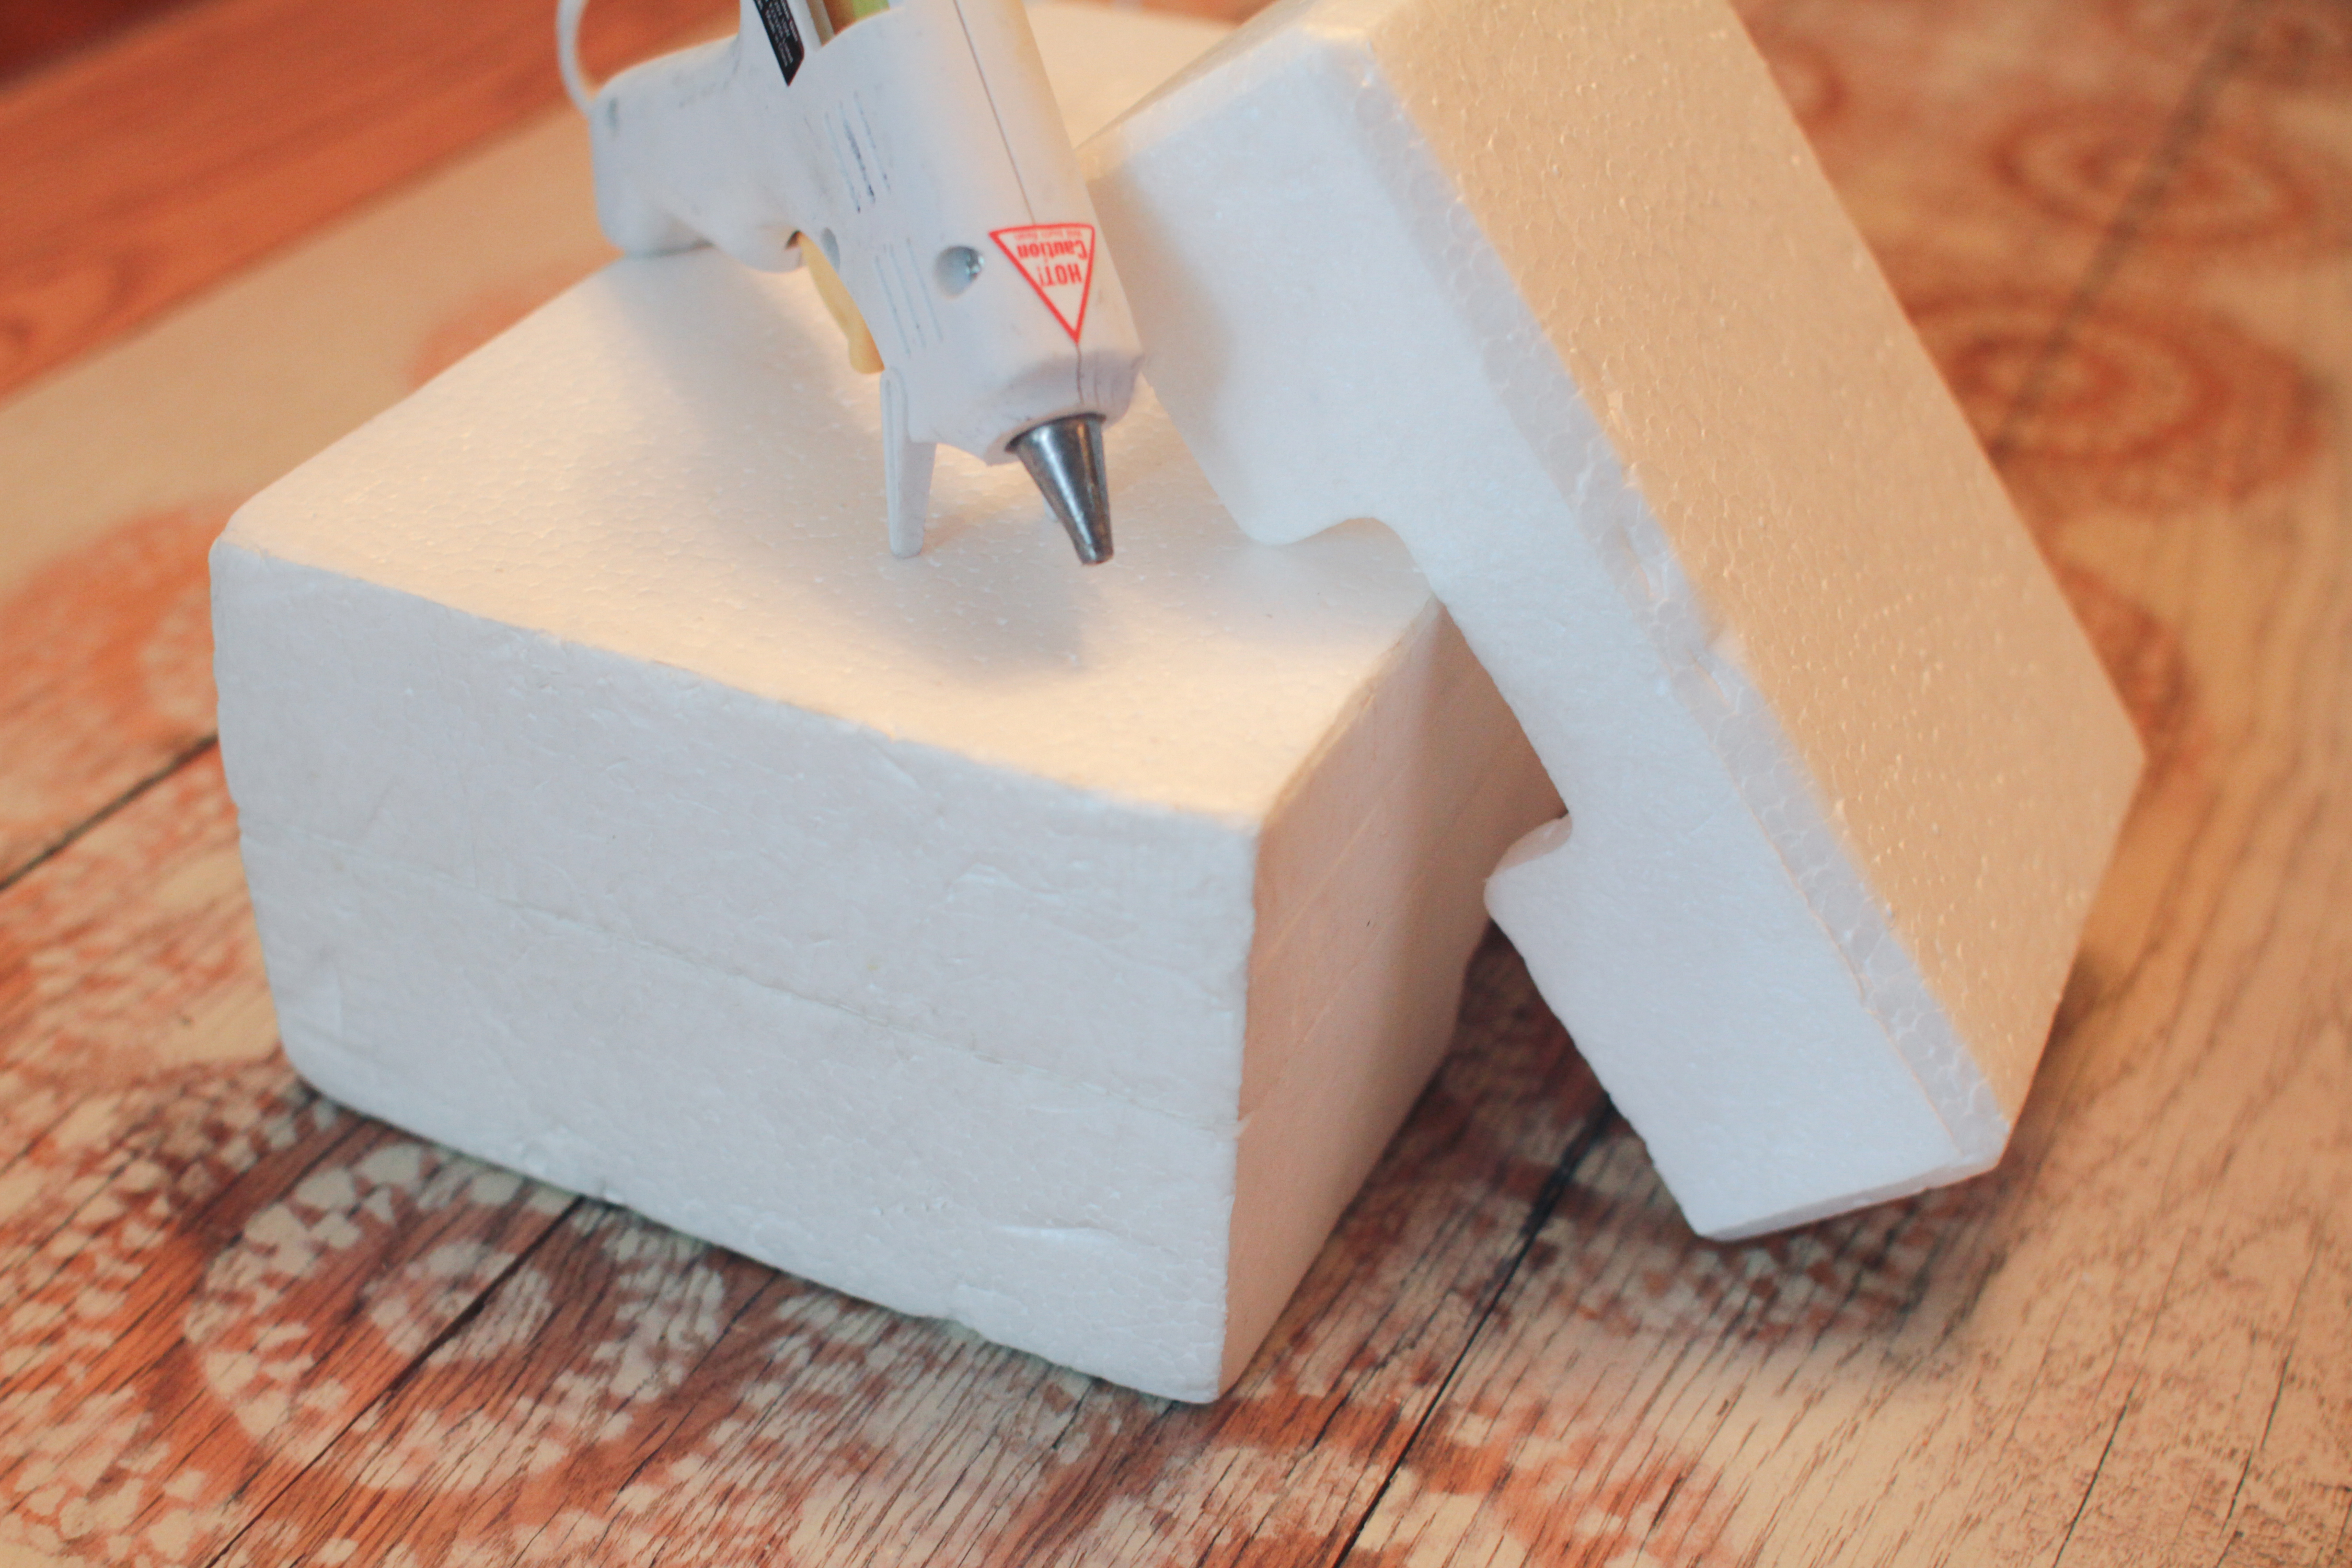 How to Make Glue From Recycled Expanded Polystyrene (styrofoam